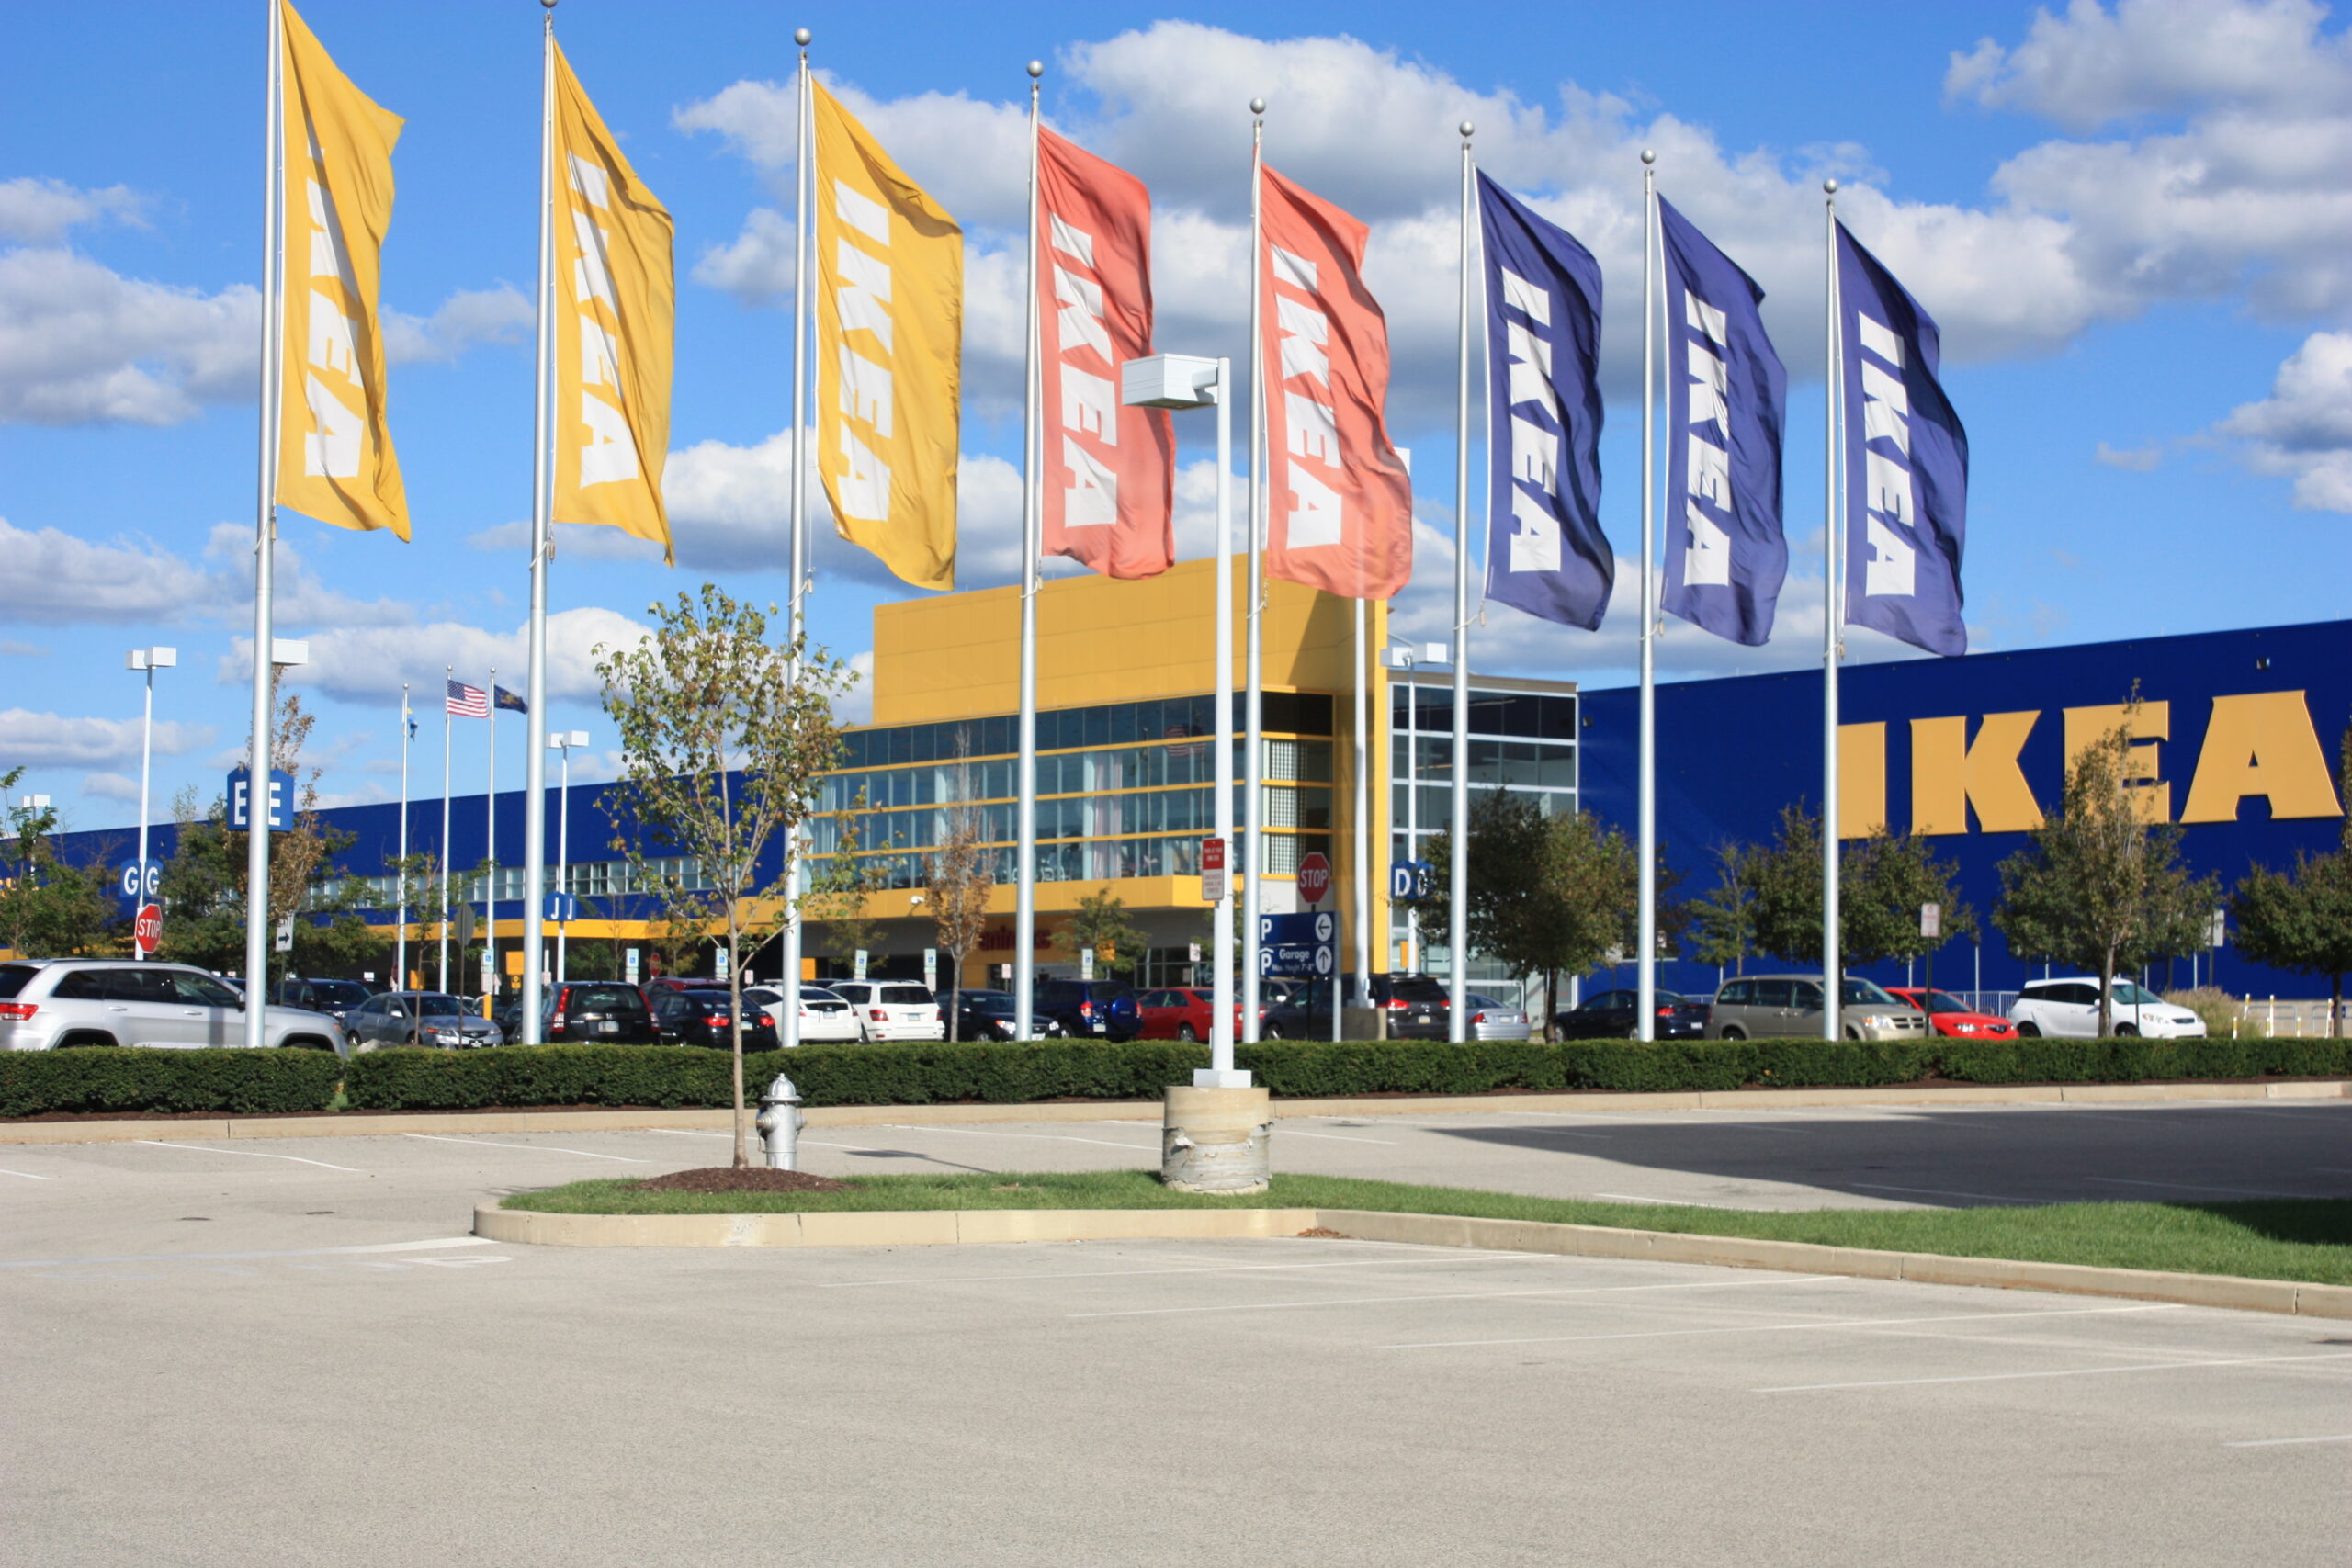 CC BY-SA 2.0 an ikea building with vehicles in the parking lot